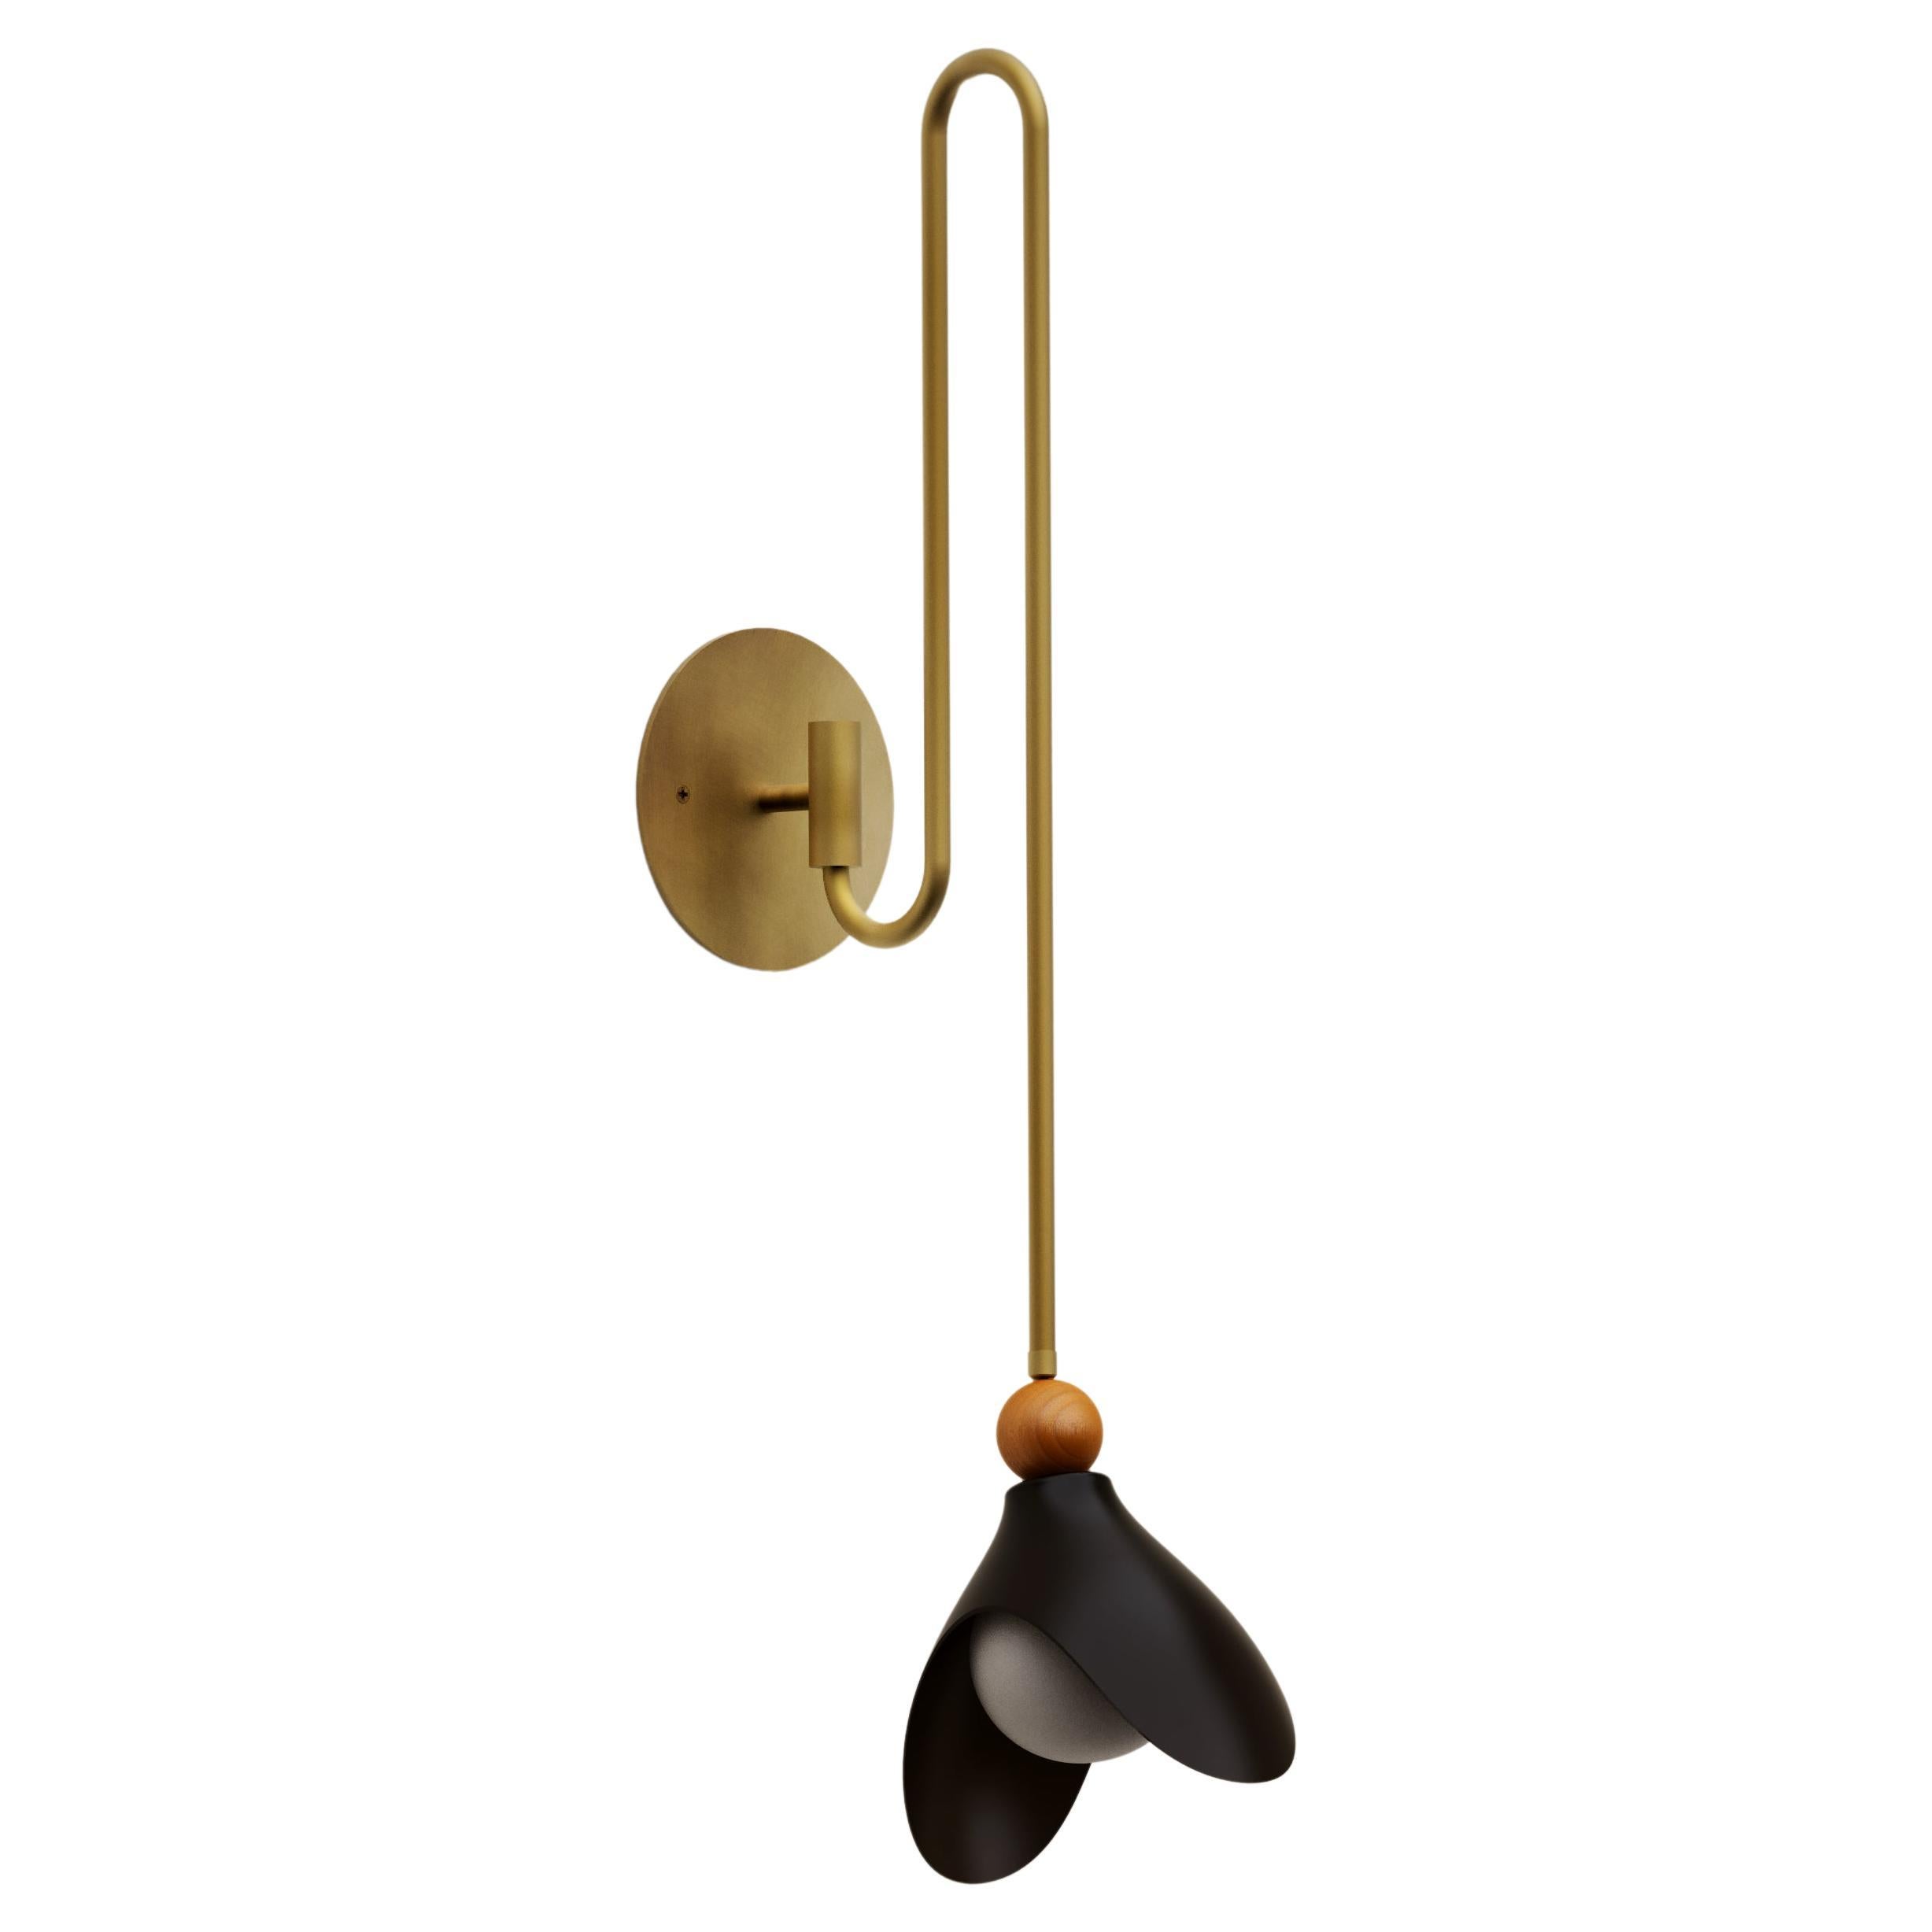 LILY Wall Sconce in Enamel, Brass & Walnut, Ginger Curtis x Blueprint Lighting For Sale